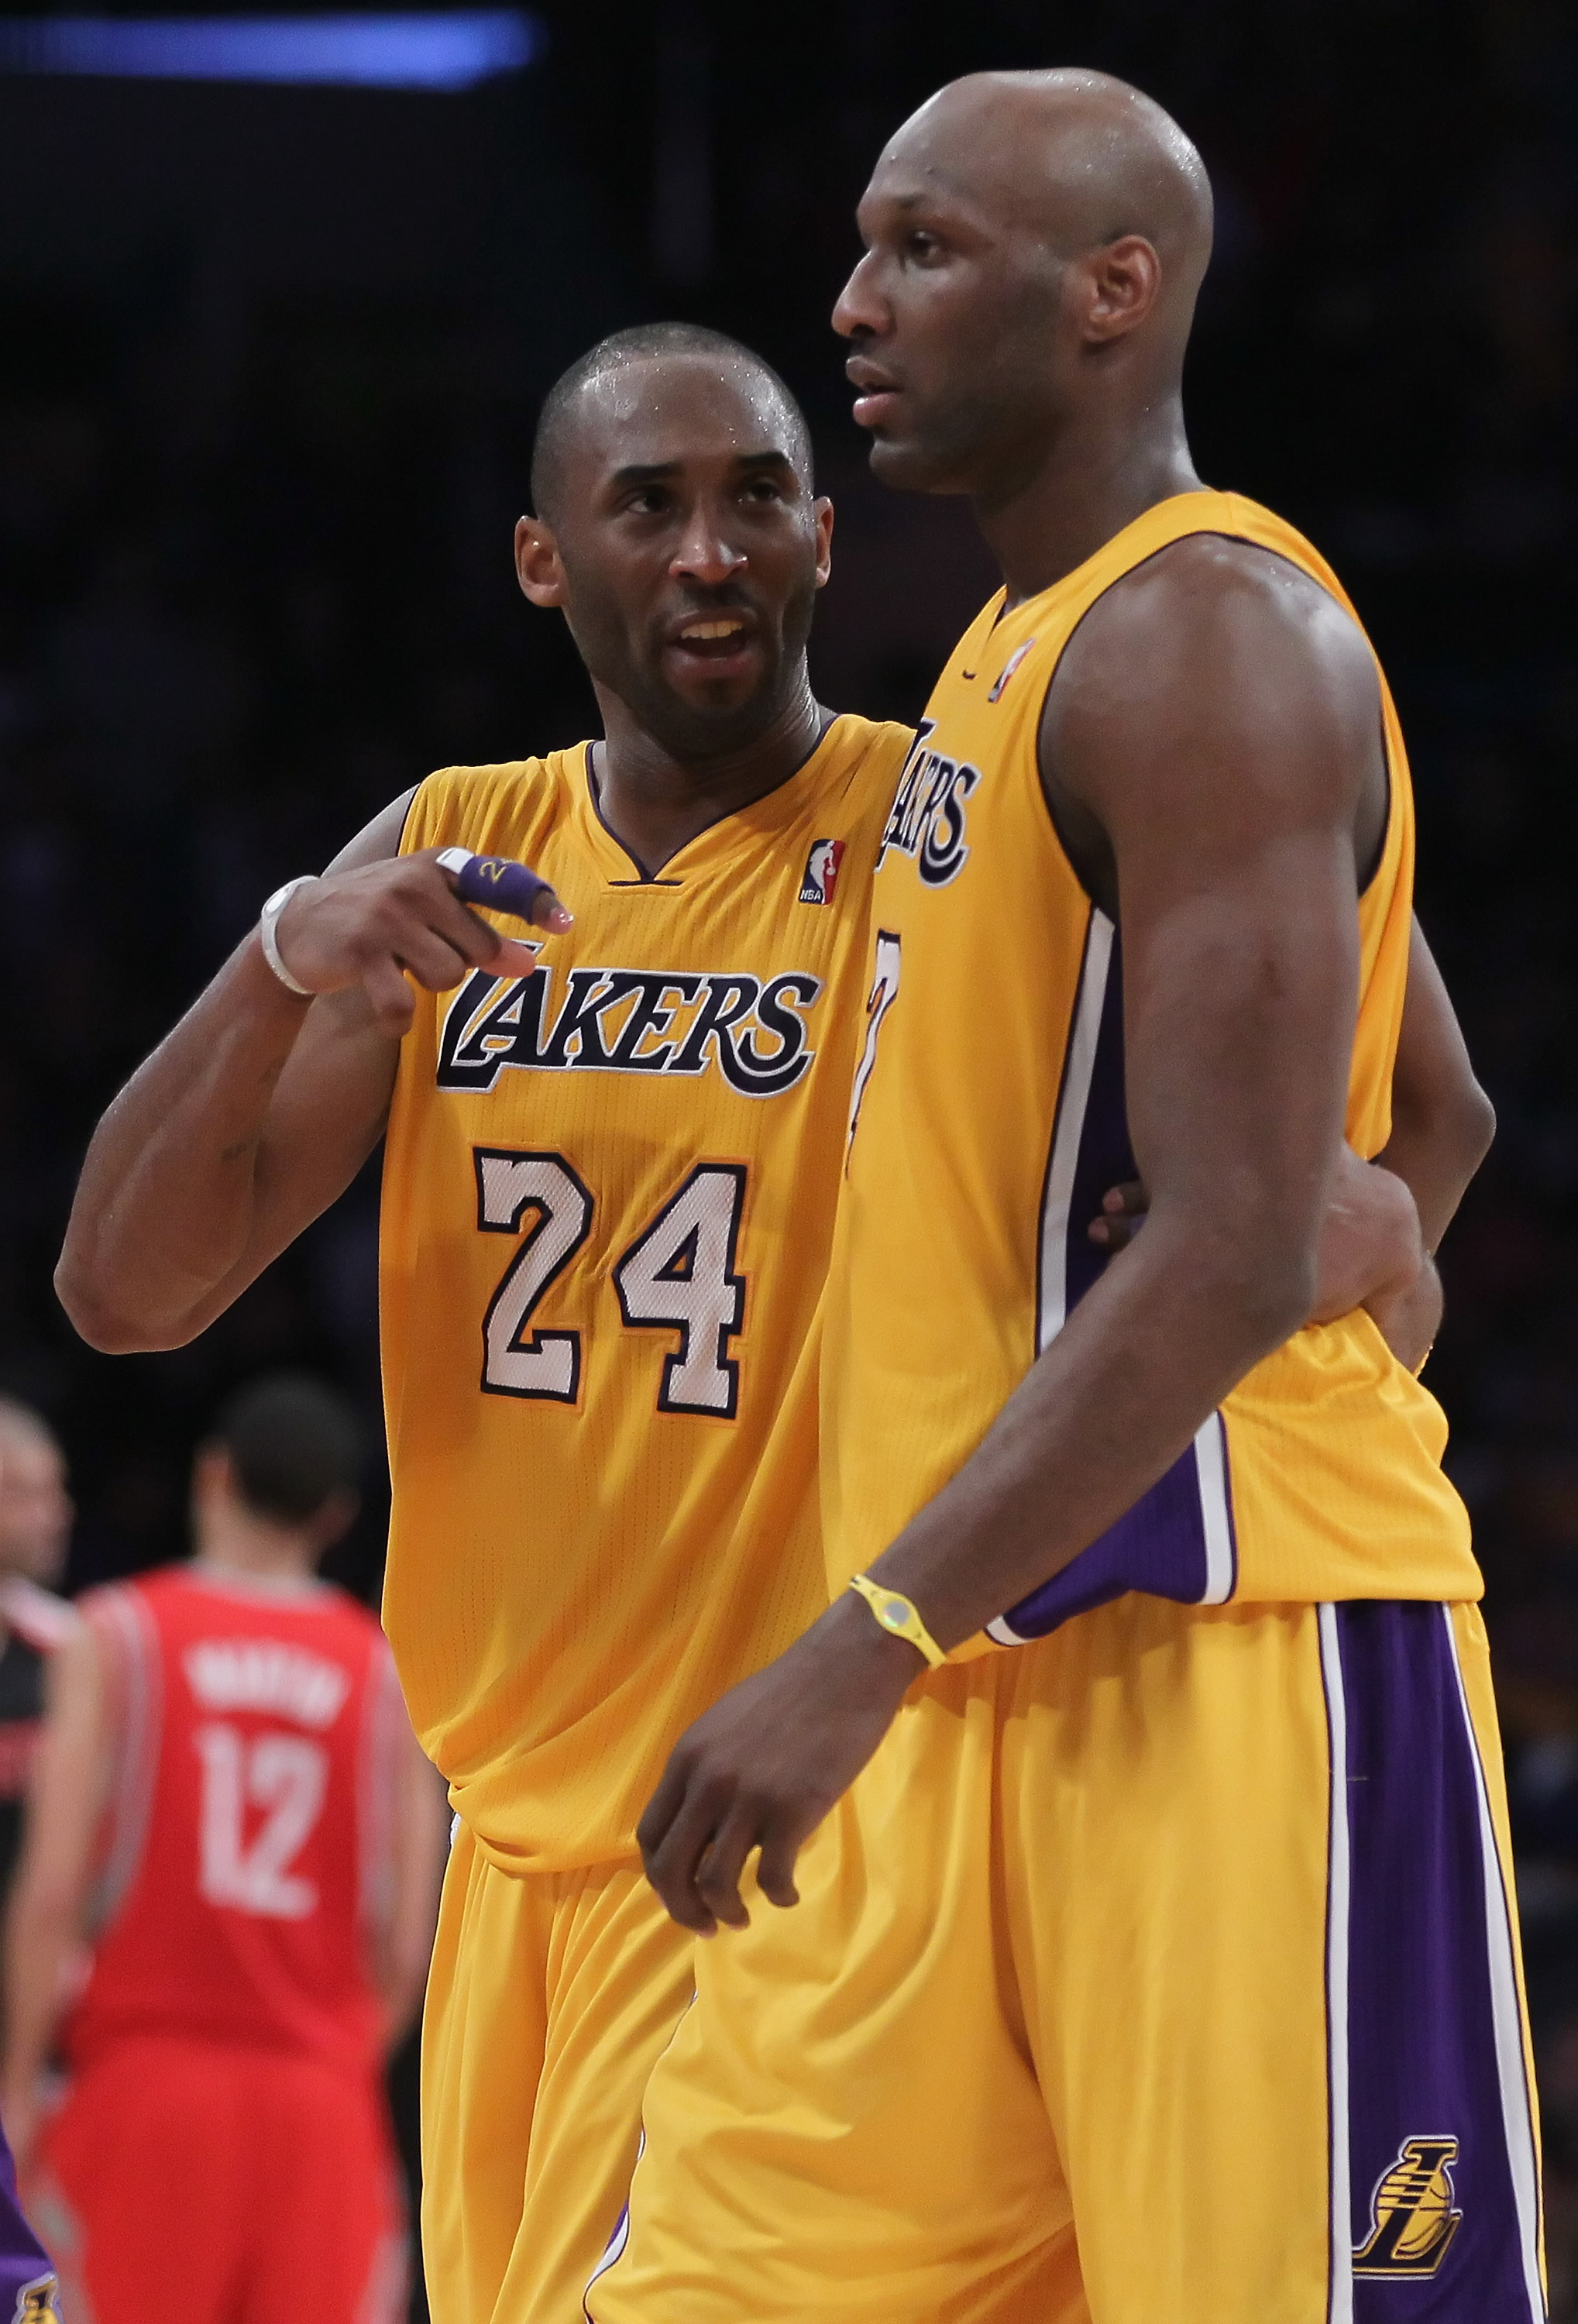 LOS ANGELES, CA - FEBRUARY 01:  Kobe Bryant #24 talks with Lamar Odom #7 of the Los Angeles Lakers against the Houston Rockets in the second half at Staples Center on February 1, 2011 in Los Angeles, California. The Lakers defeated the Rockets 114-106. NO